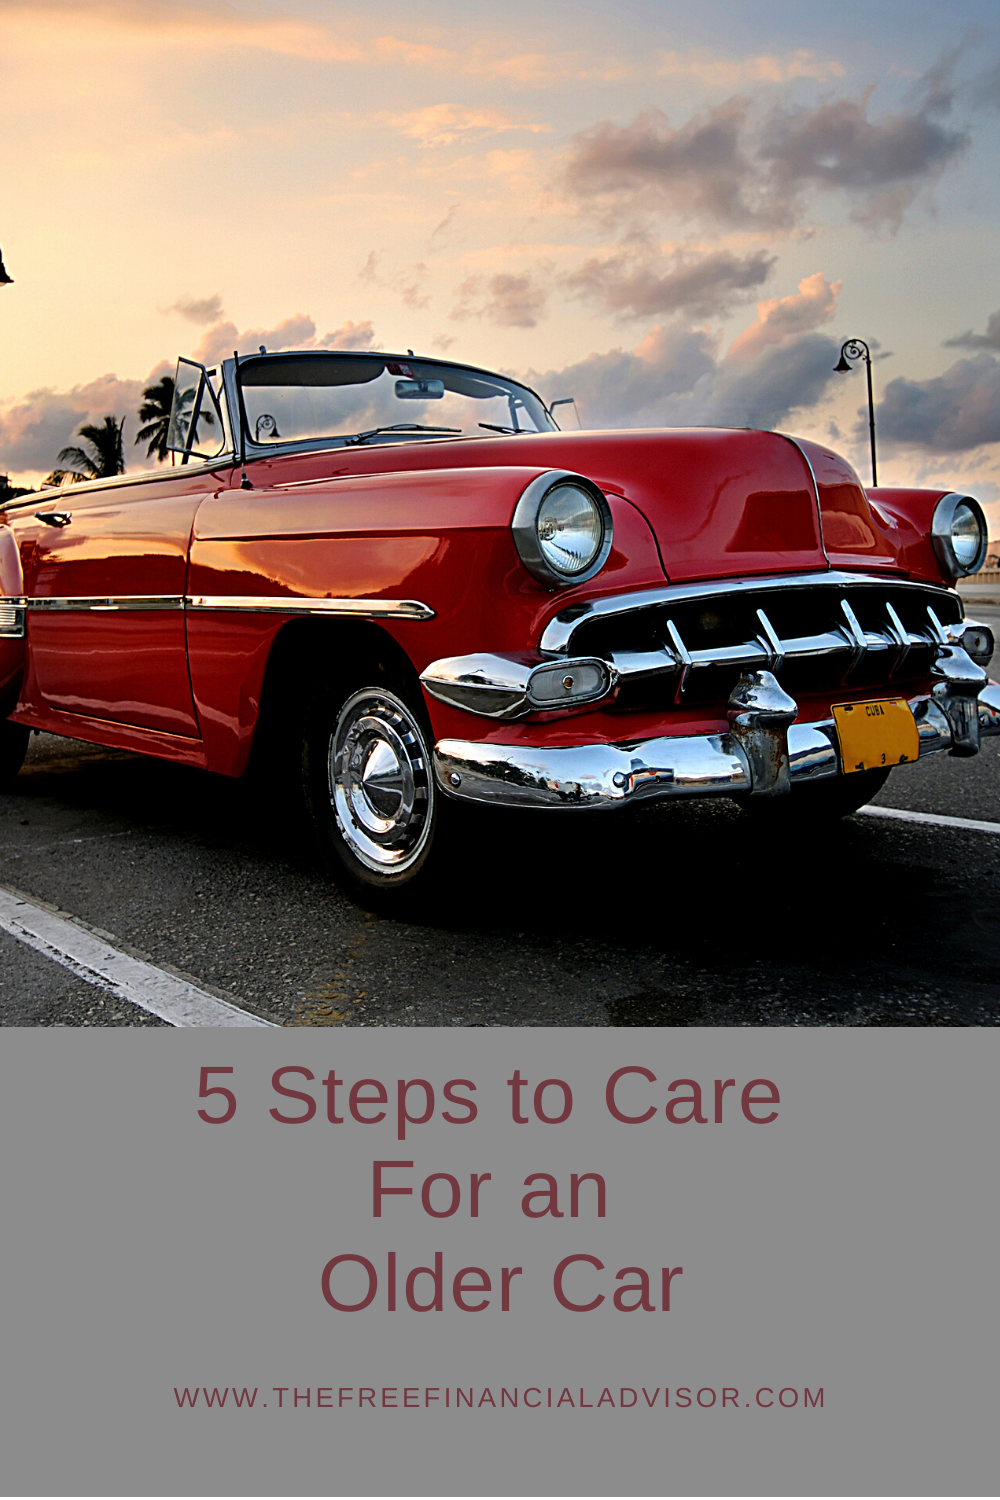 5 Steps to Care For an Older Car